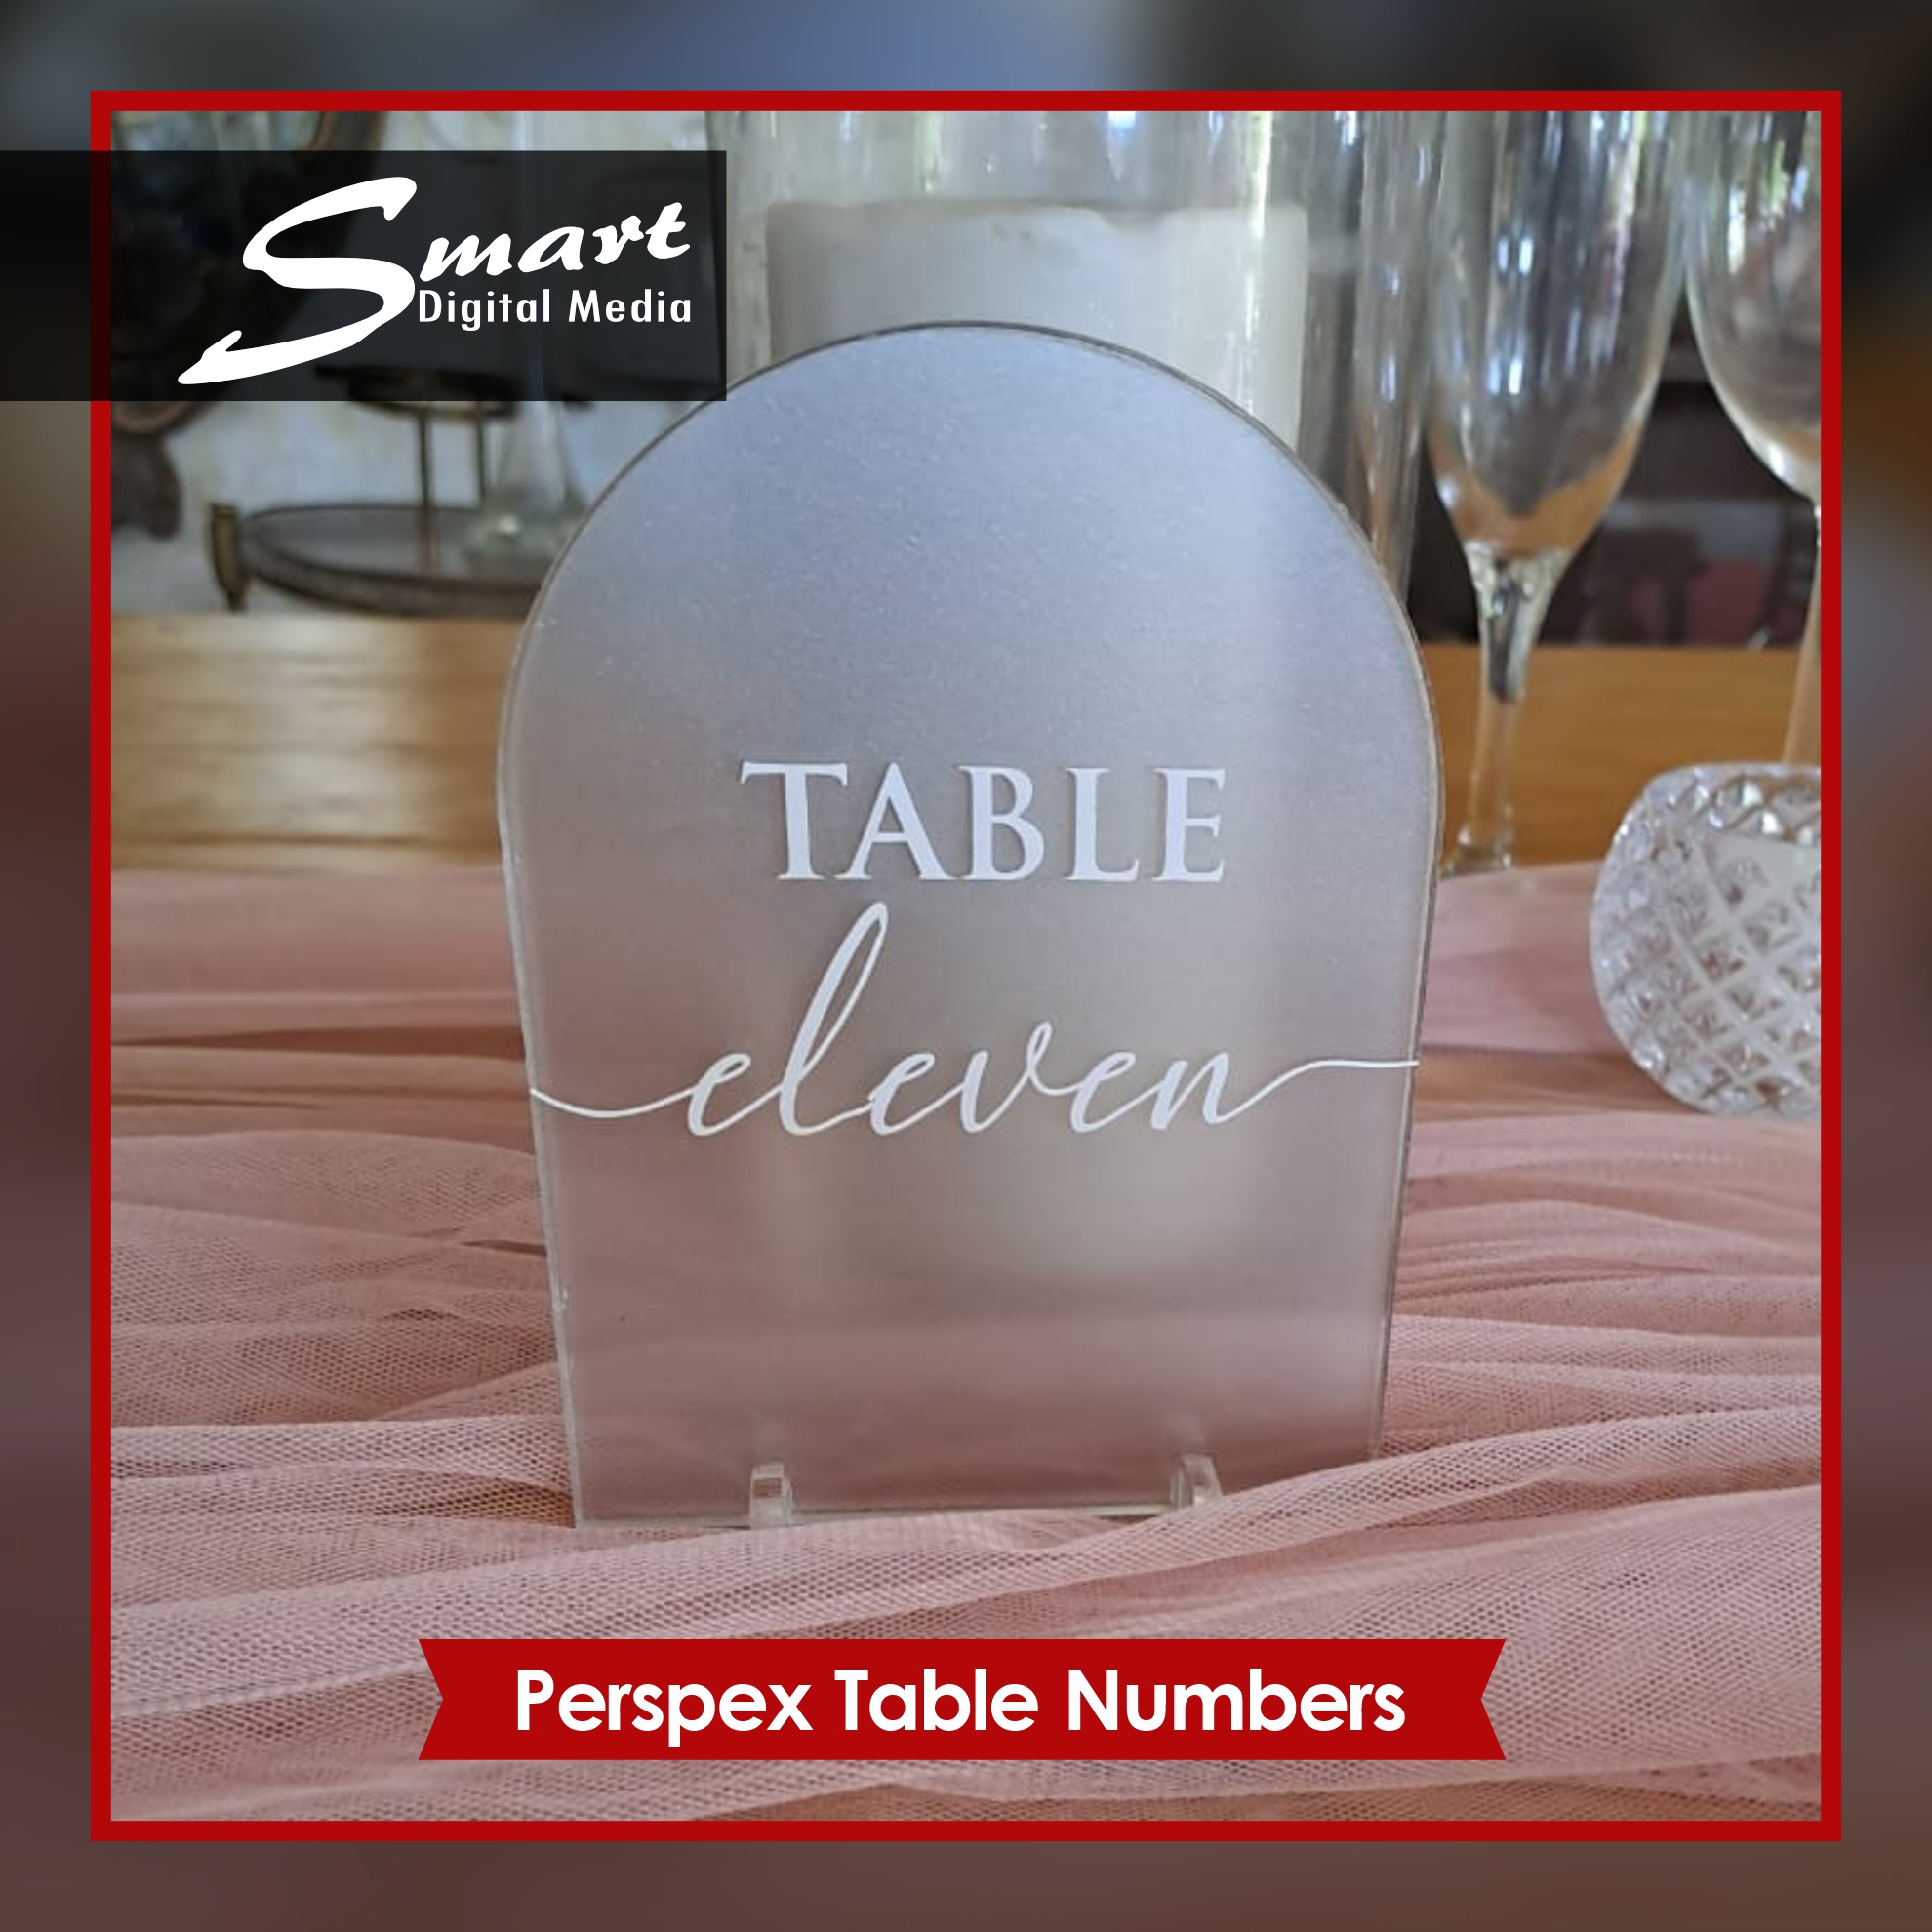 Table numbering made from Perspex and Vinyl Material.